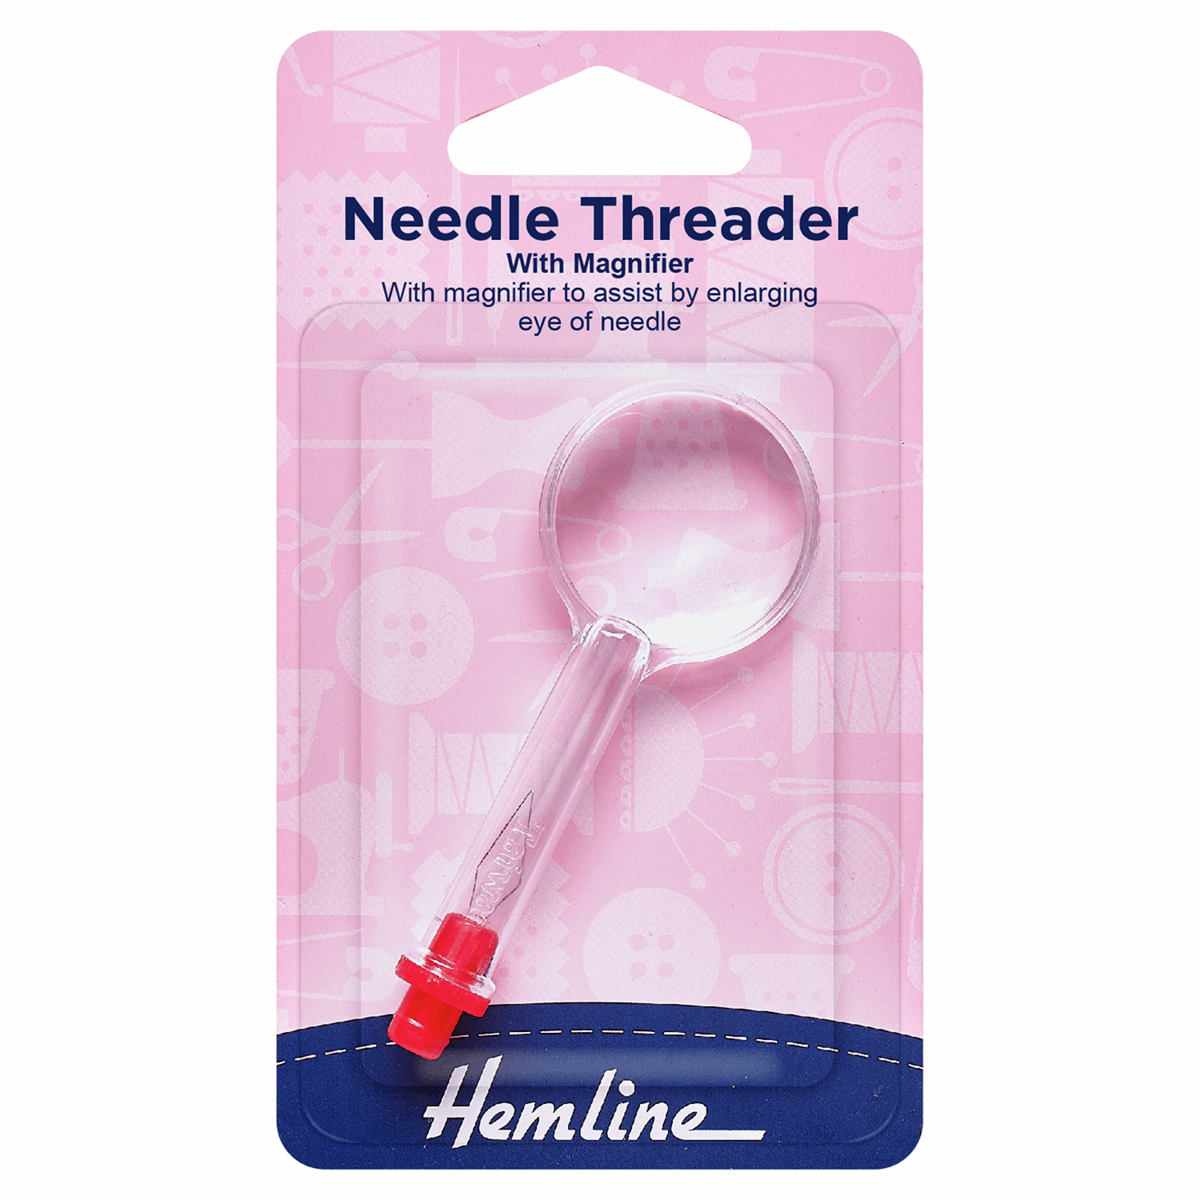 Needle threader with a magnifier by Hemline 